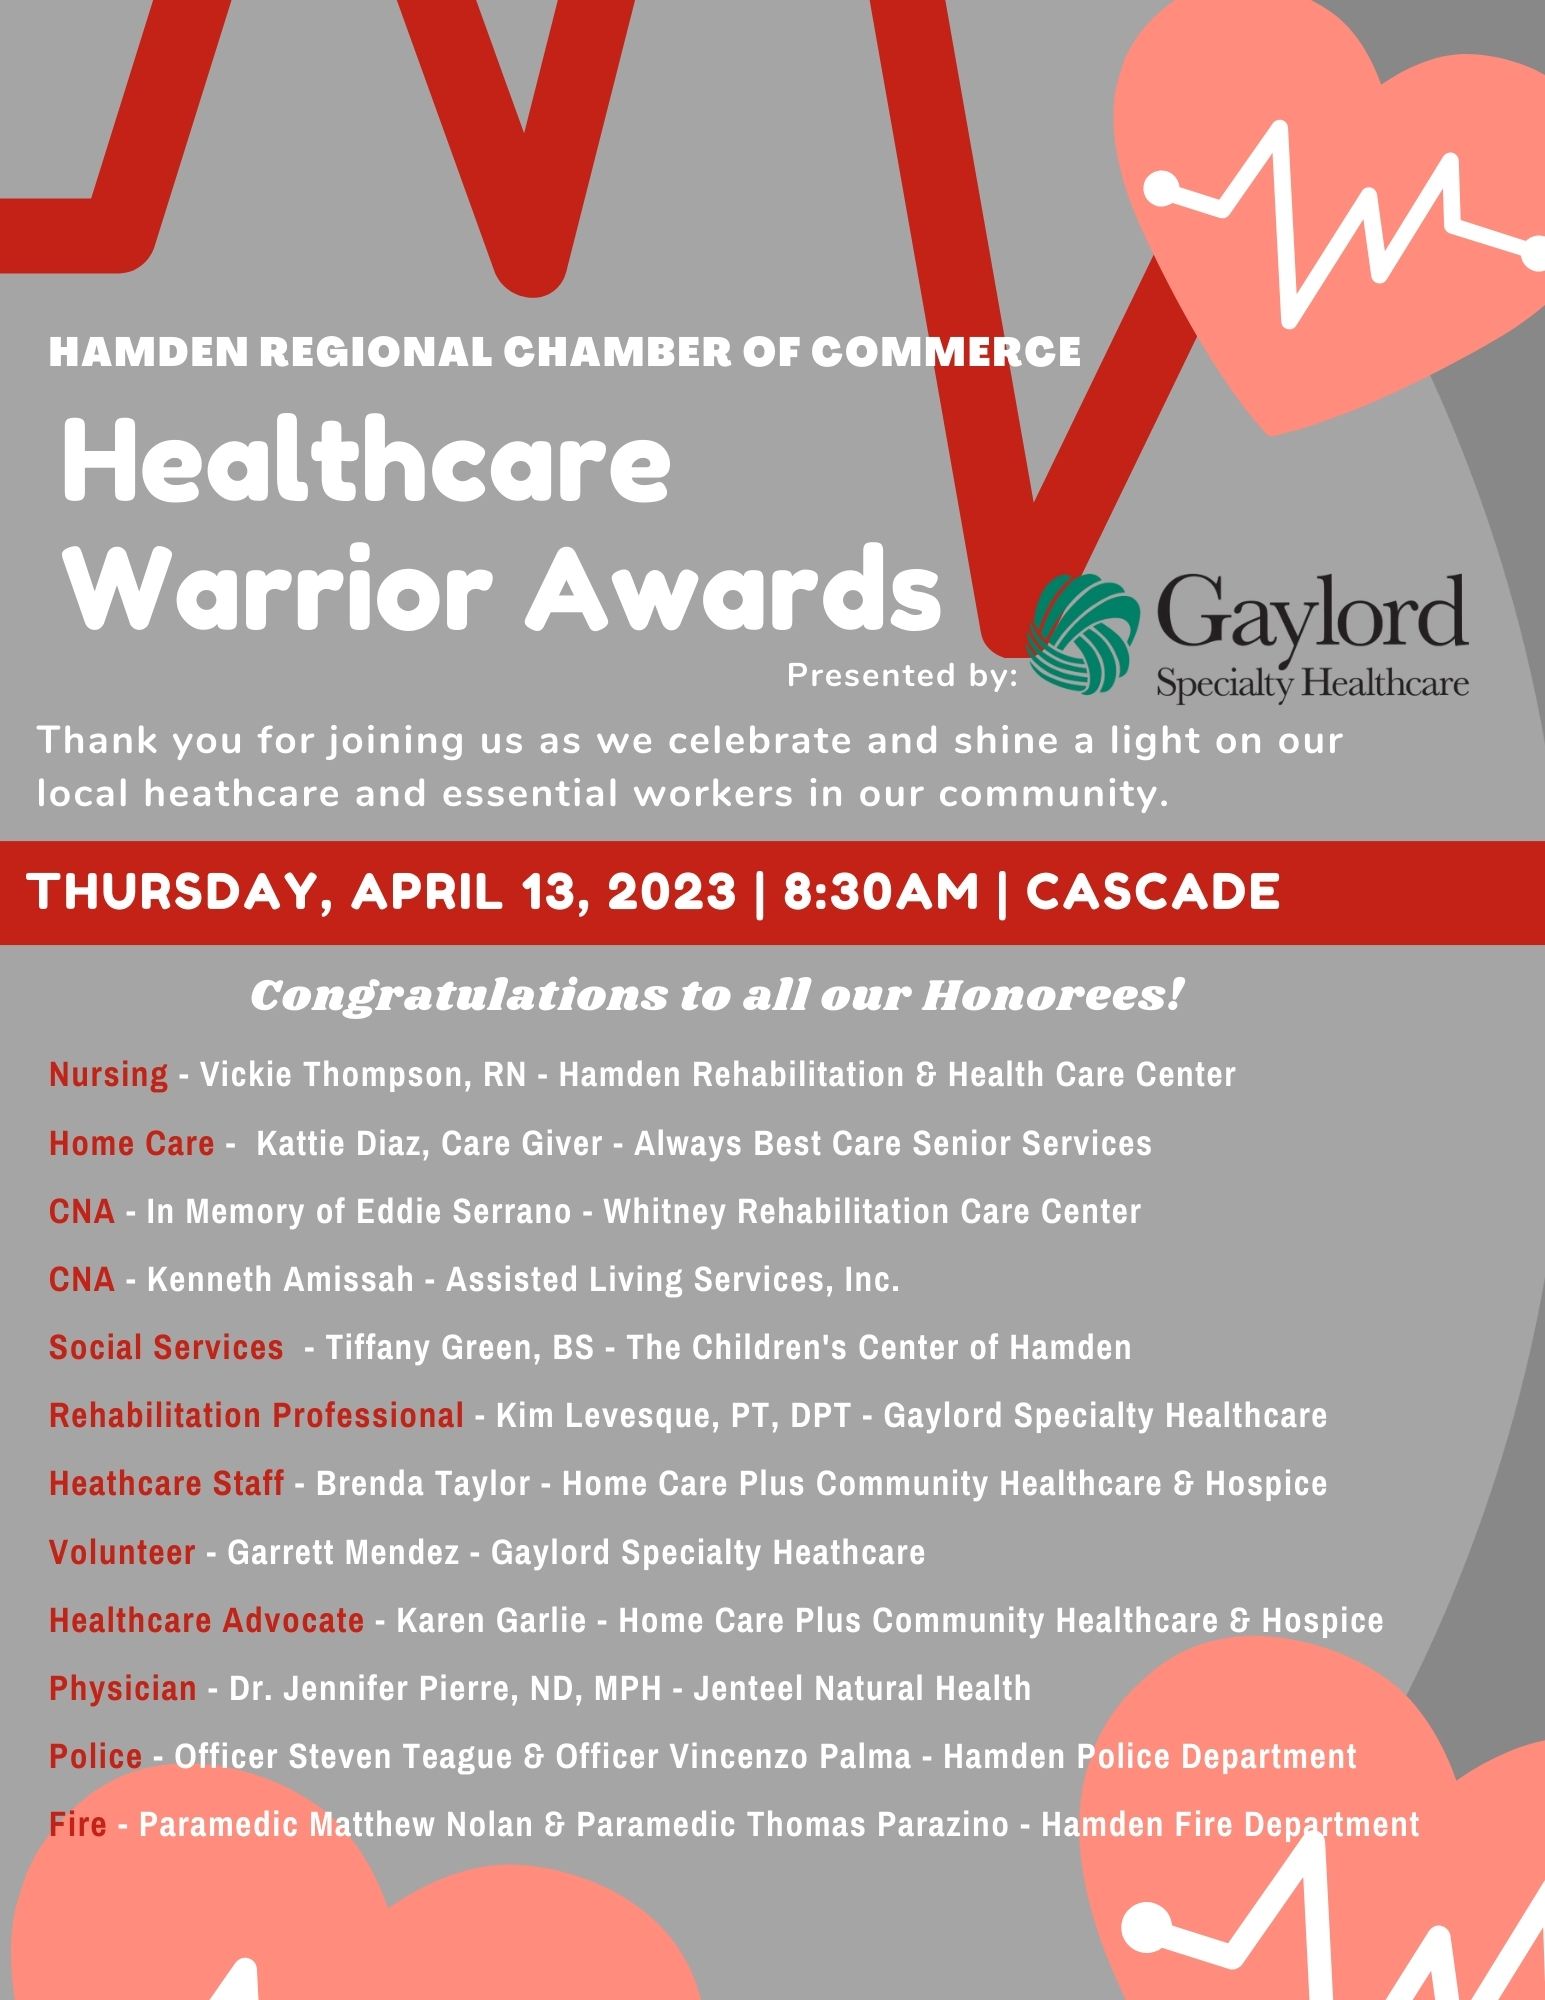 Healthcare Warrior Award Honorees for 2023